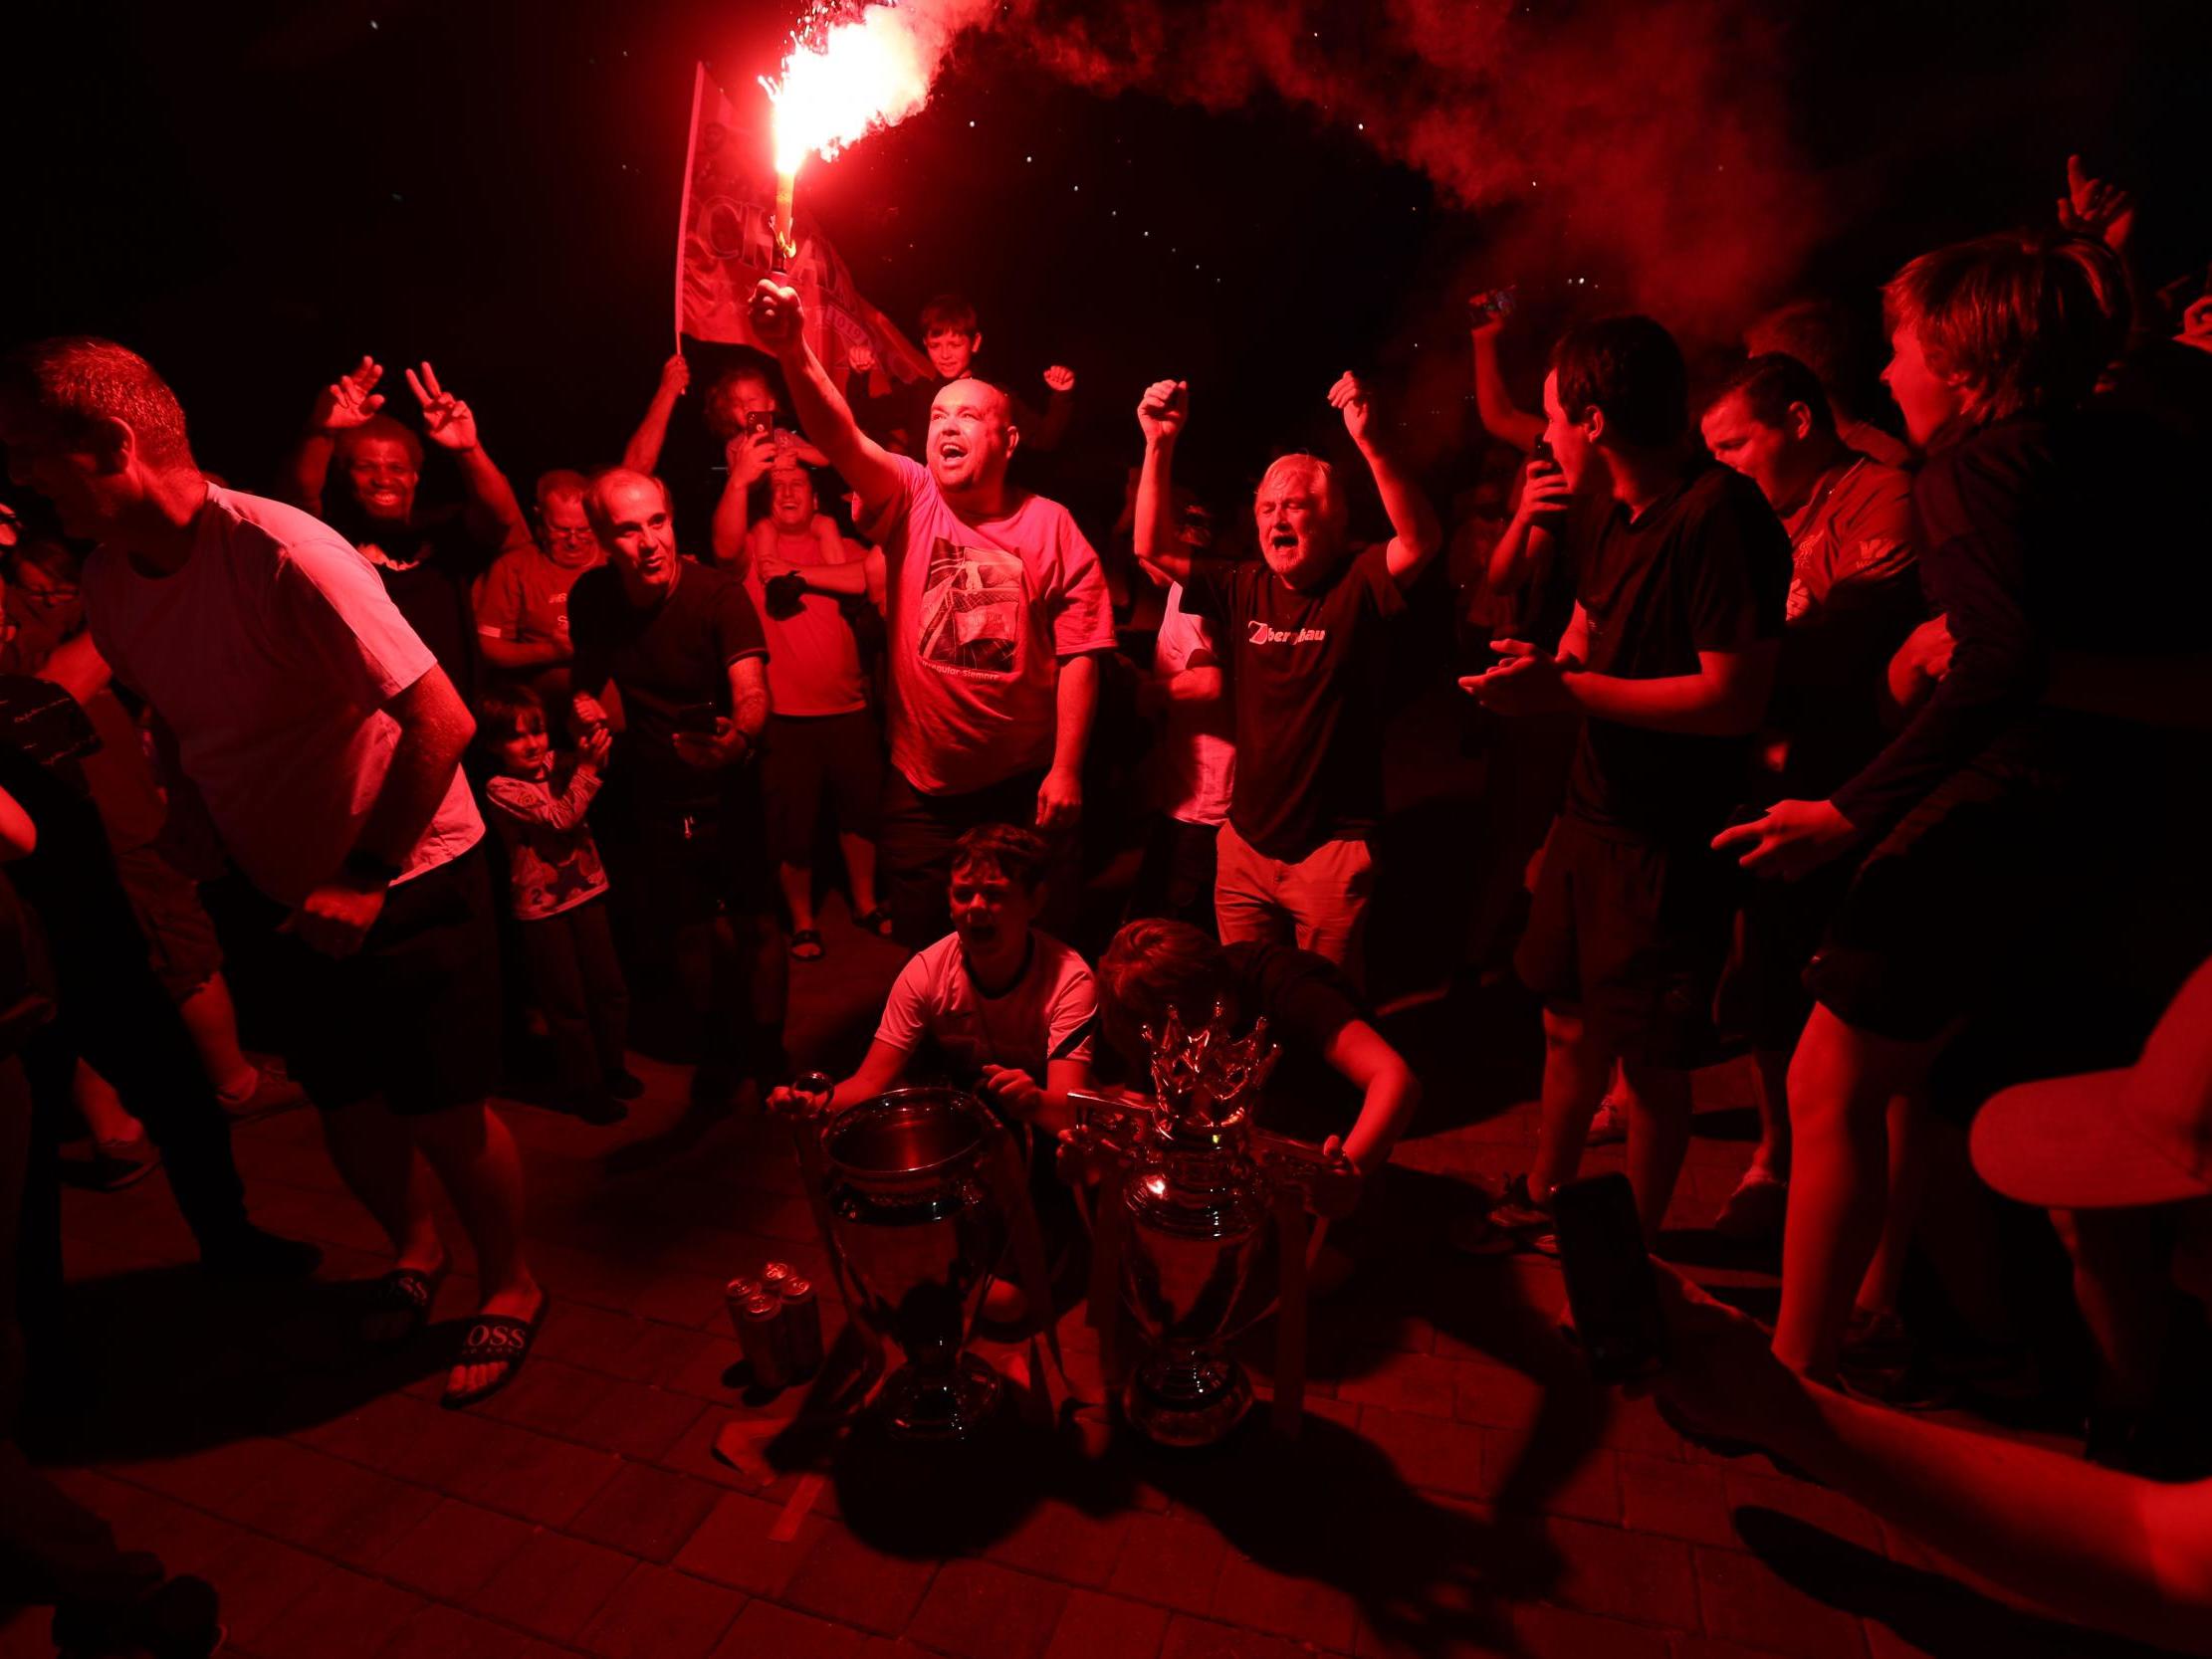 Fans at Anfield celebrate Liverpool winning the Premier League title